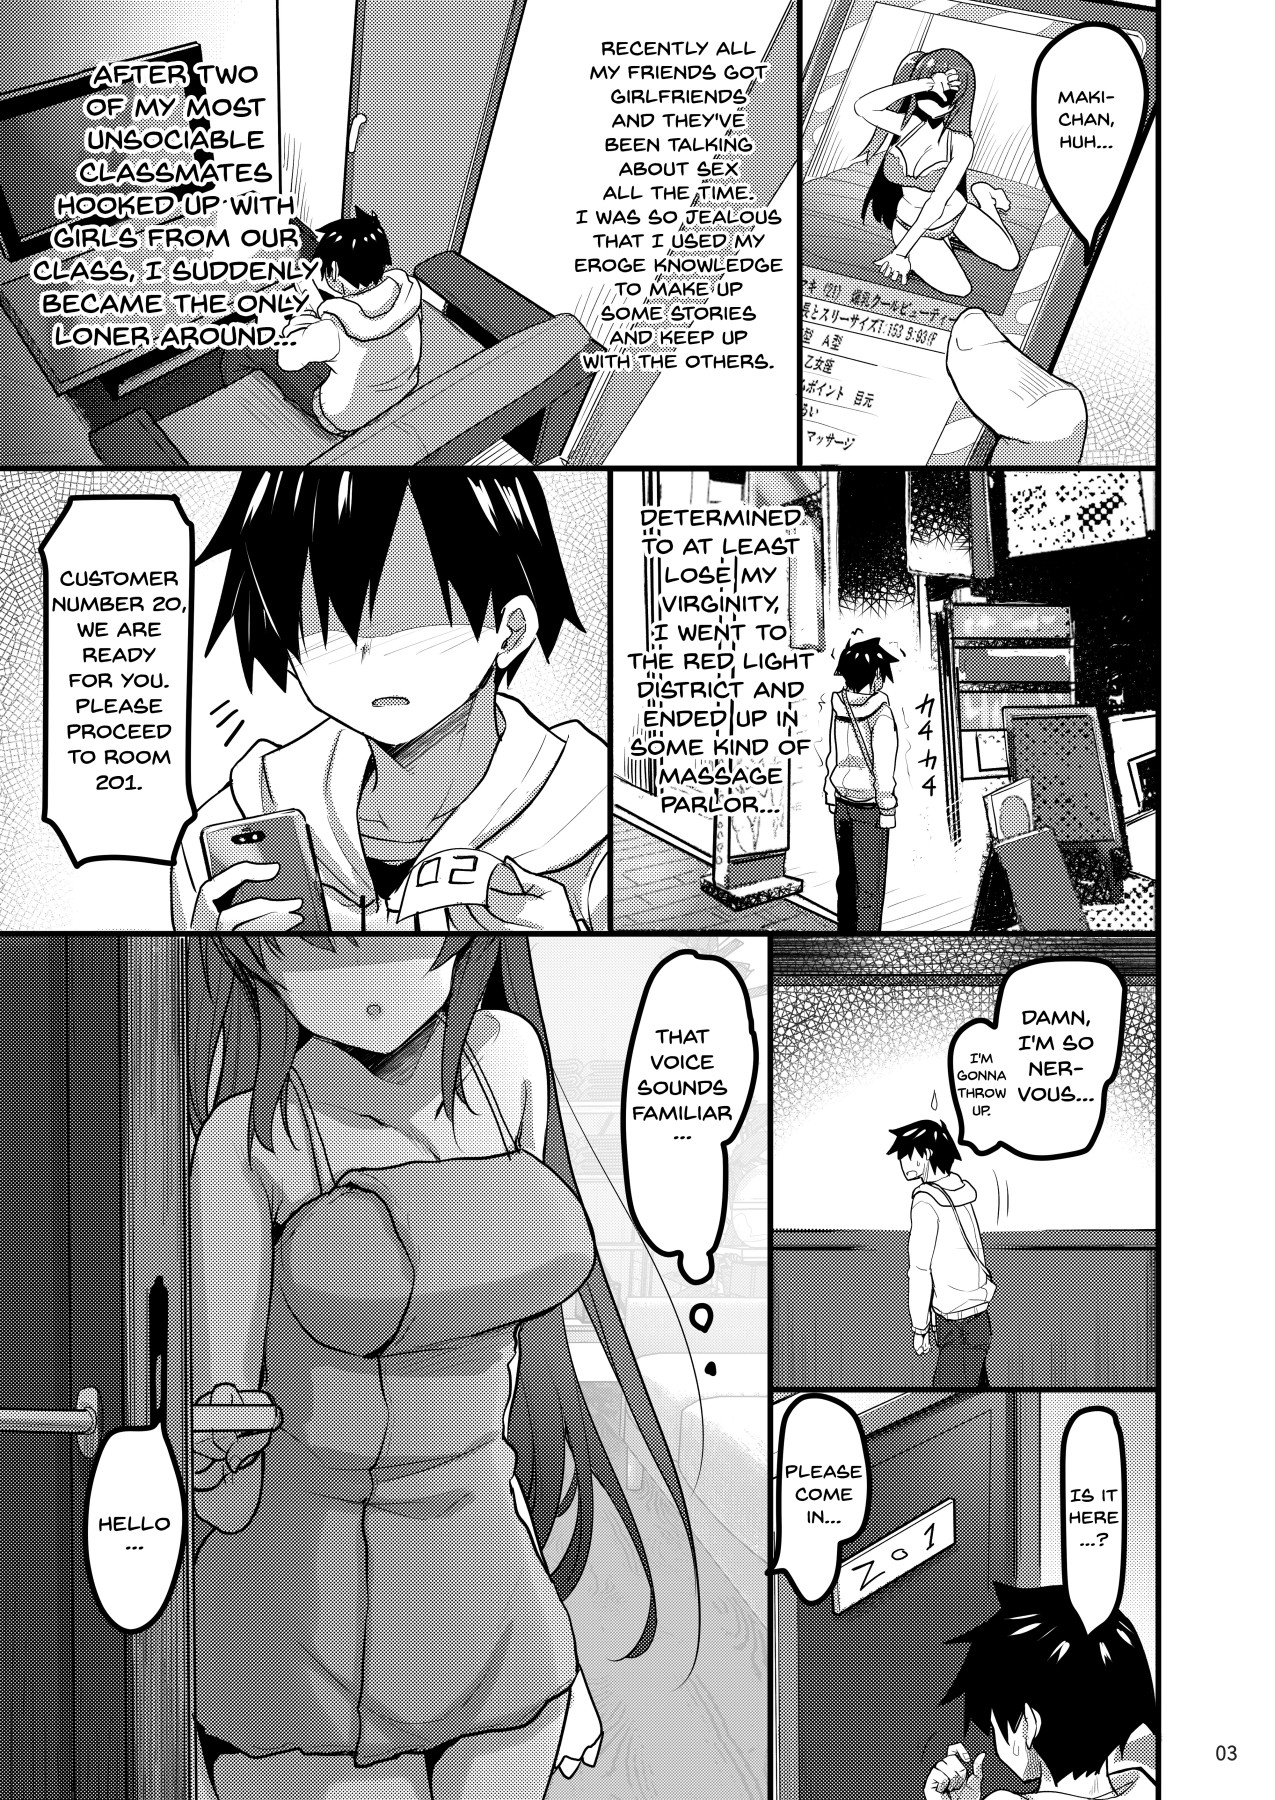 Hentai Manga Comic-A Story Of Going Out To Get a Massage And The One Who Shows Up Is My Classmate-Read-2